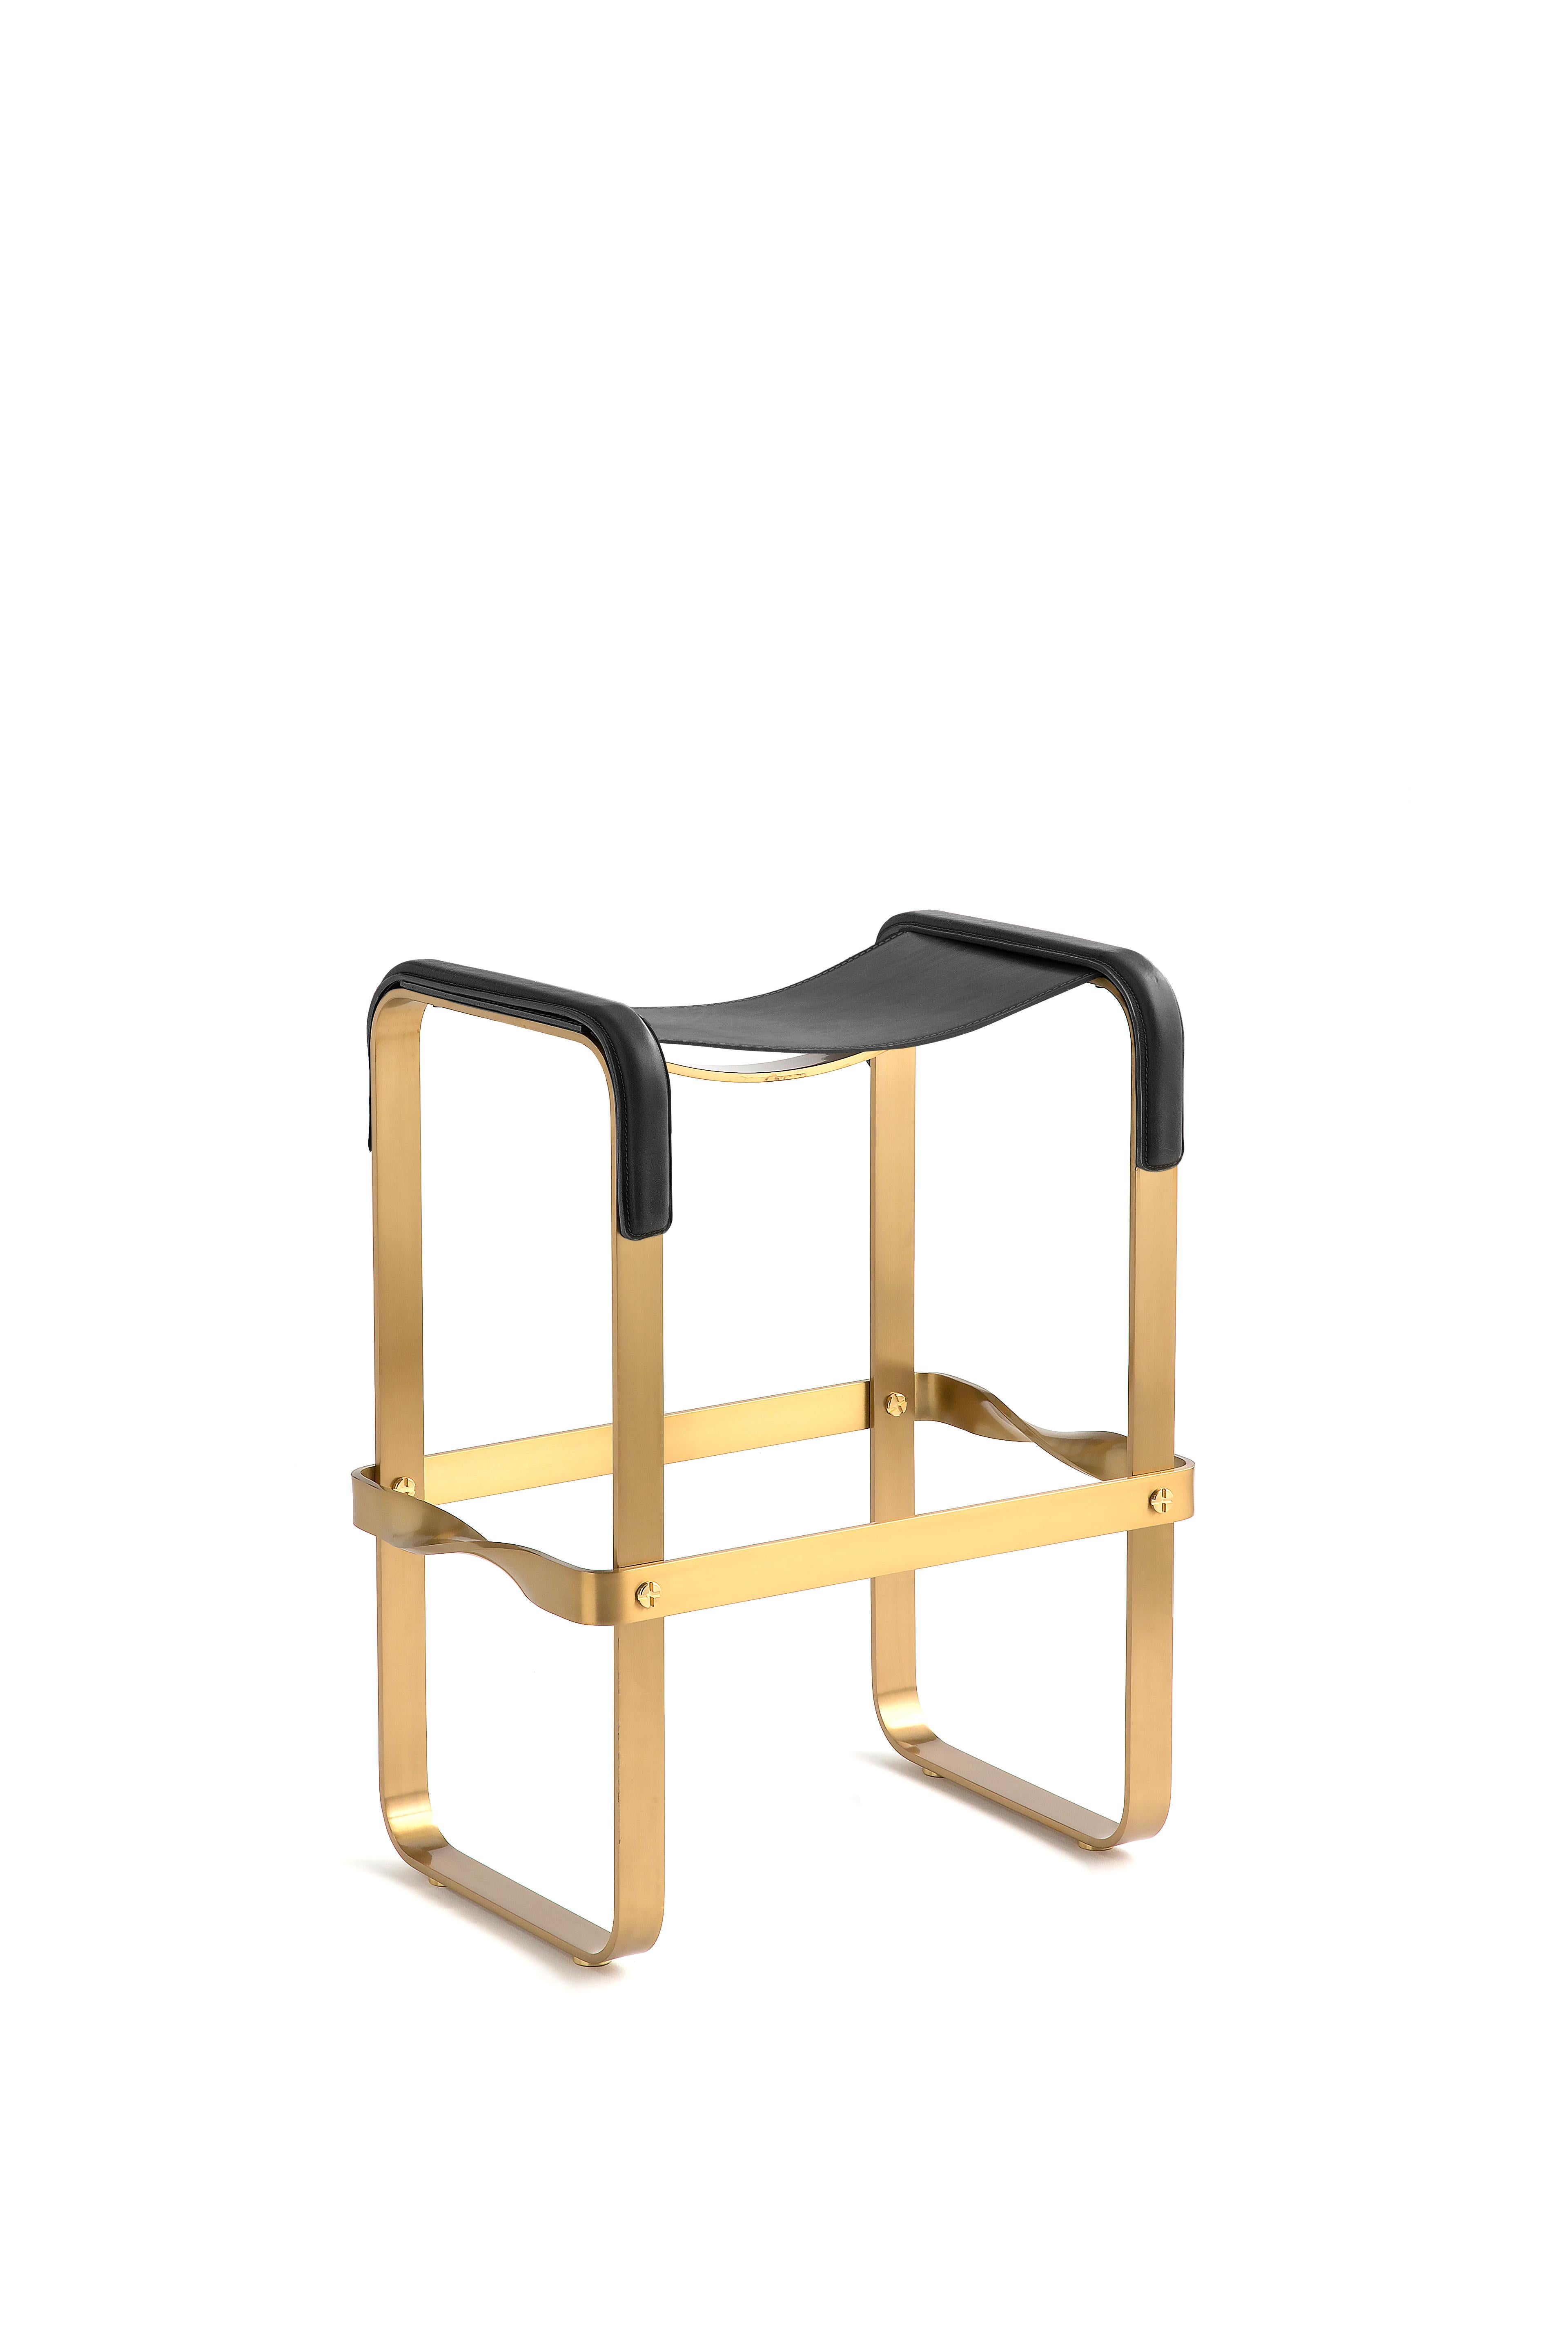 Minimalist Pair Contemporary Classic Counter Bar Stool Aged Brass Metal & Black Leather For Sale